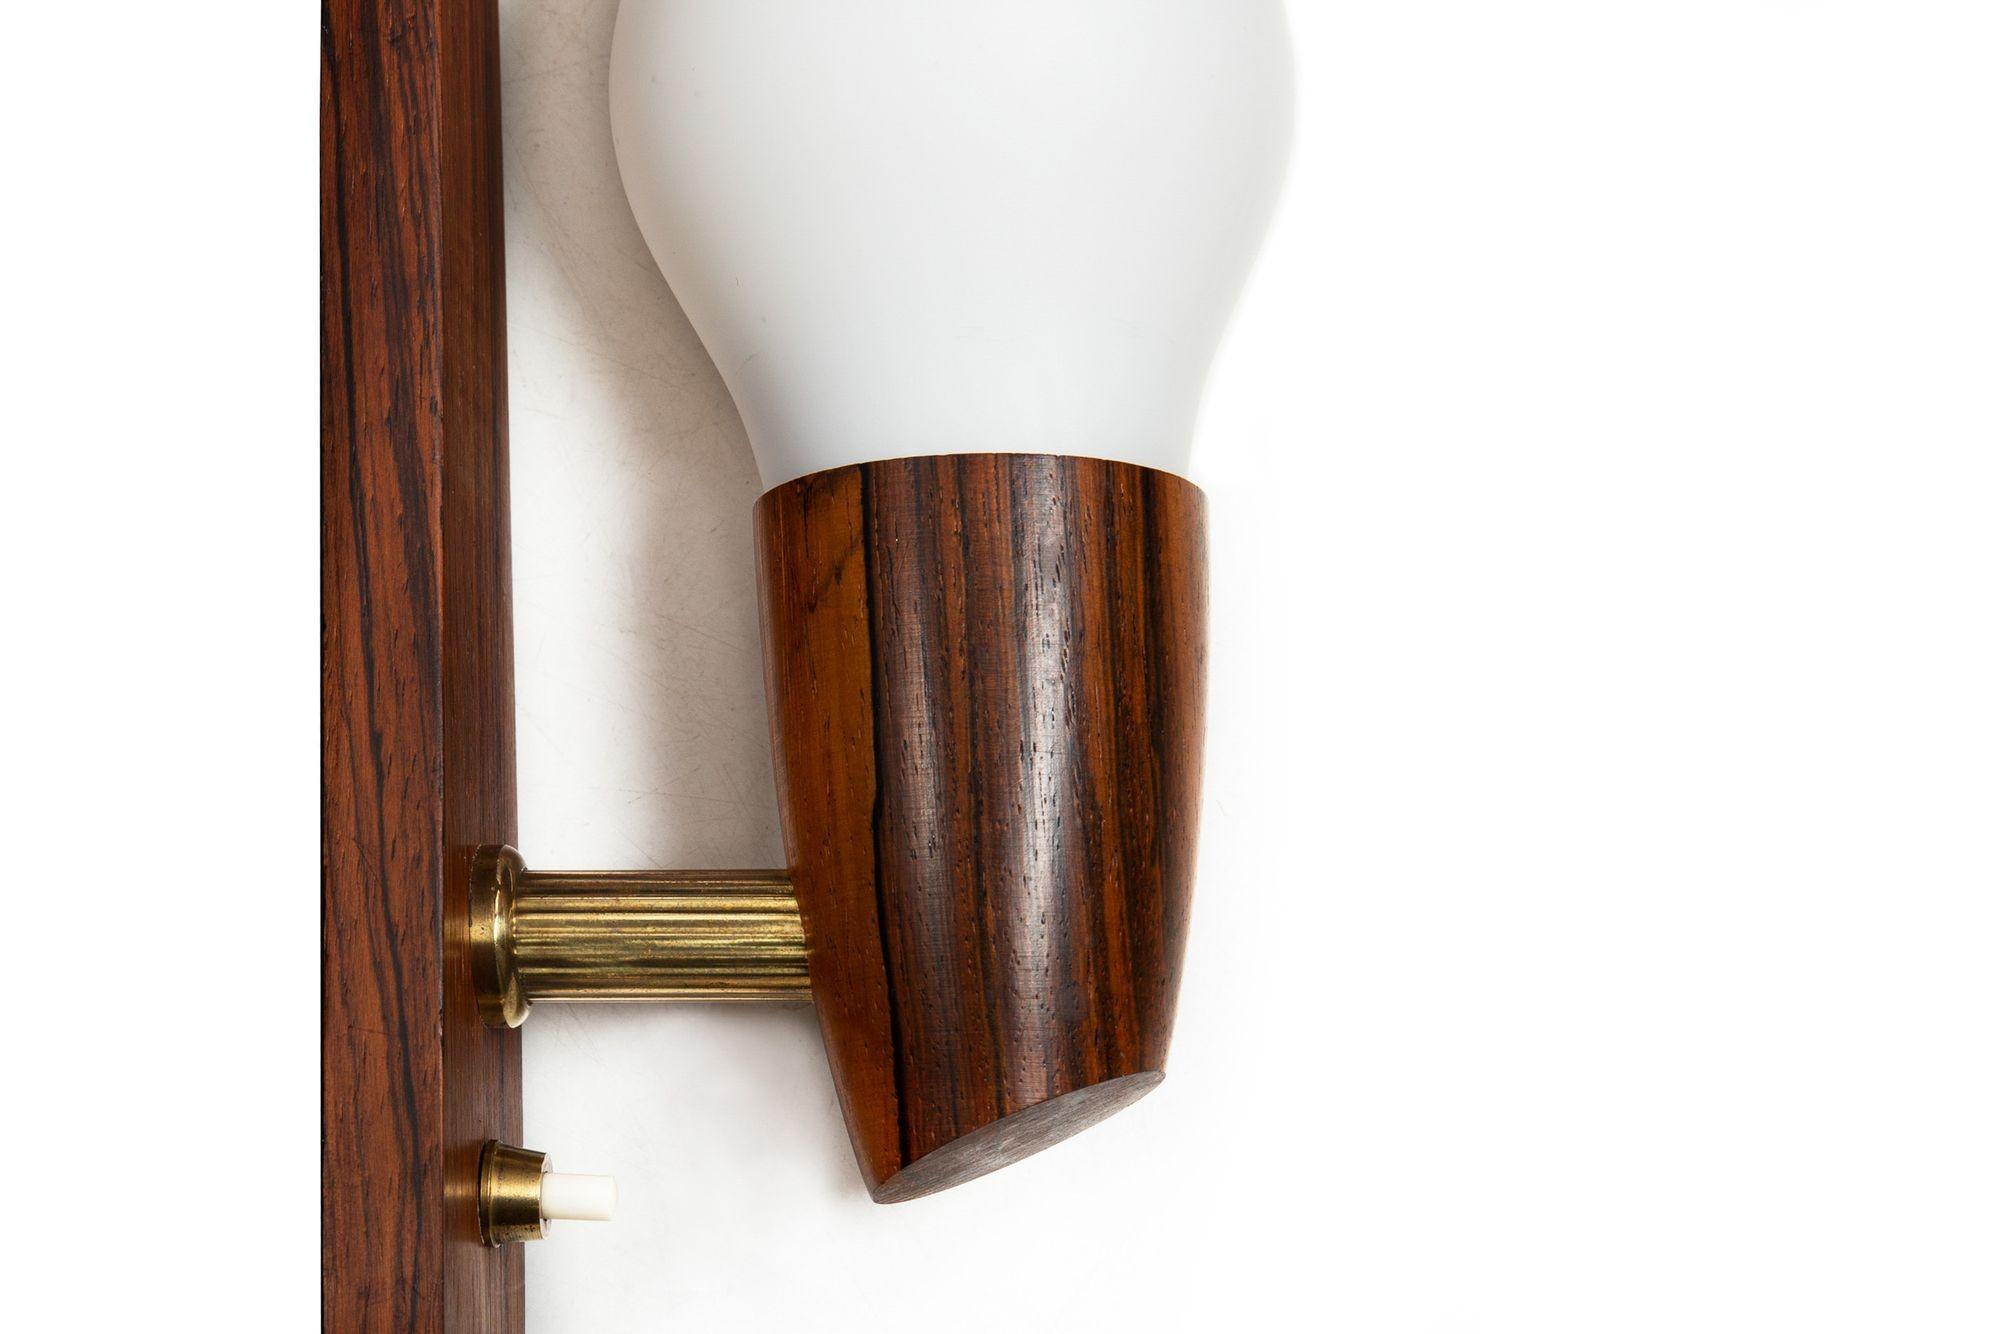 Pair of Danish Modern Rosewood Wall Sconces by Vitrika circa 1970s For Sale 1